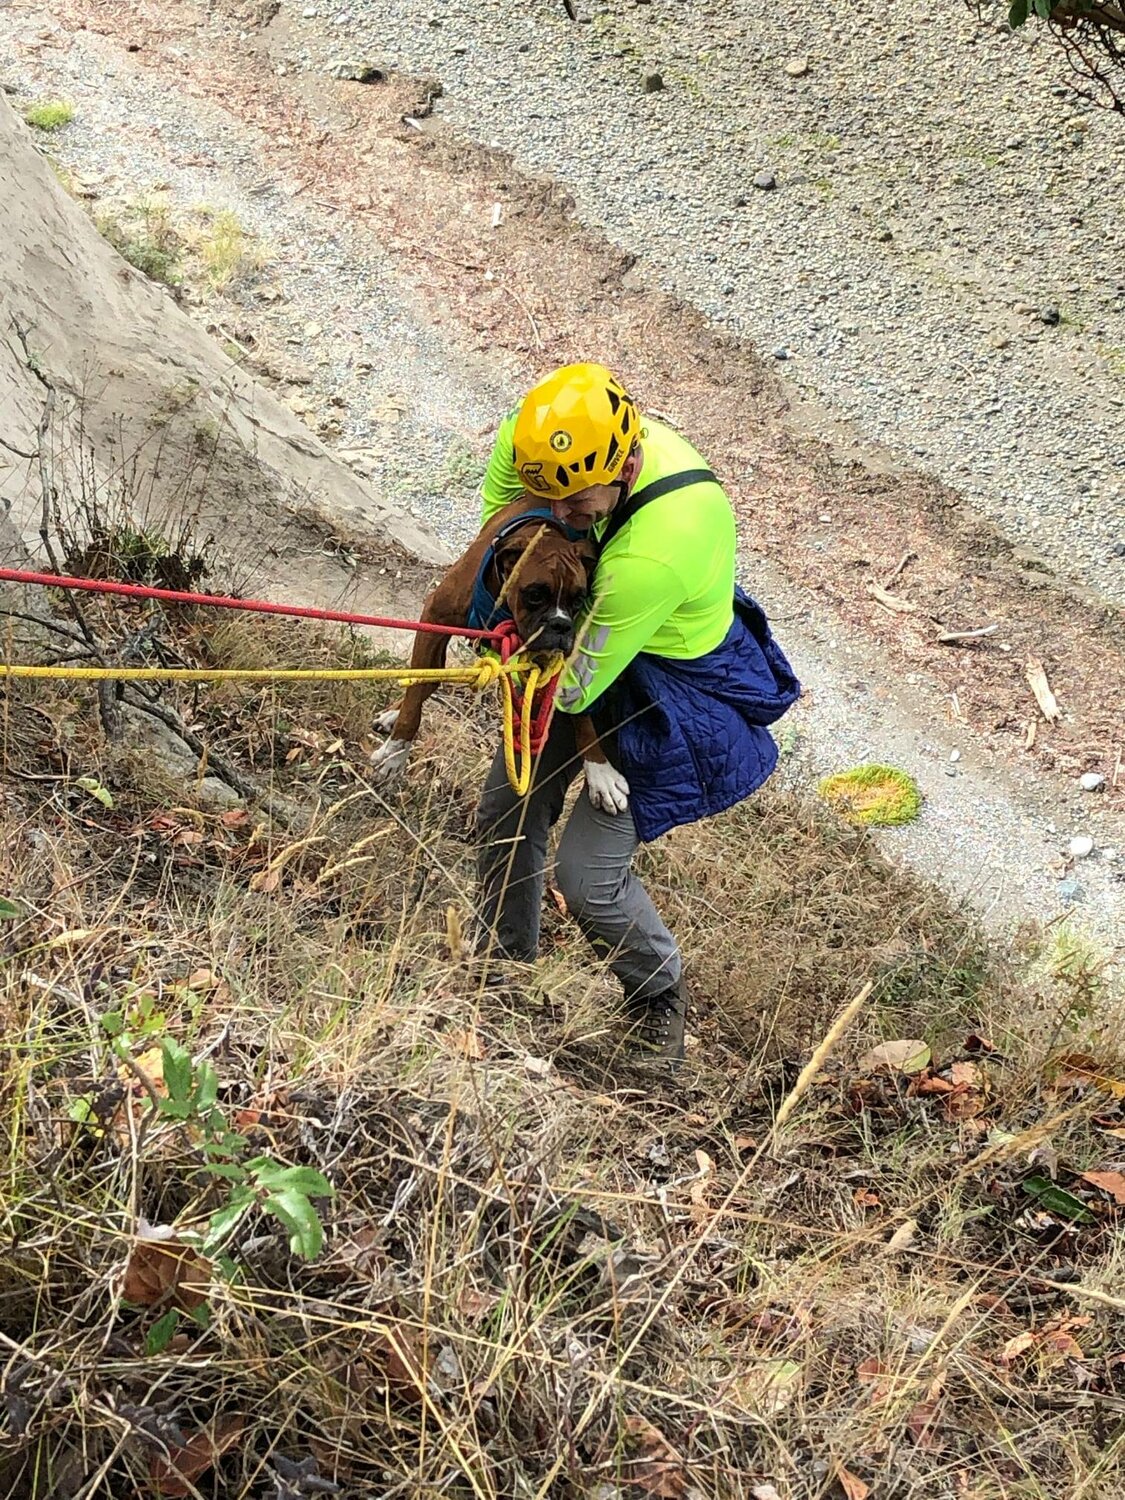 JSAR assists Jefferson County Sheriff’s Office to rescue “George” the boxer that was stuck over the edge of a bluff on Marrowstone Island in September 2020. George was put into a K-9 harness by volunteer rescuer Matt Stewart and lifted to safety with a twin tension rope rescue system. Photos courtesy JSAR